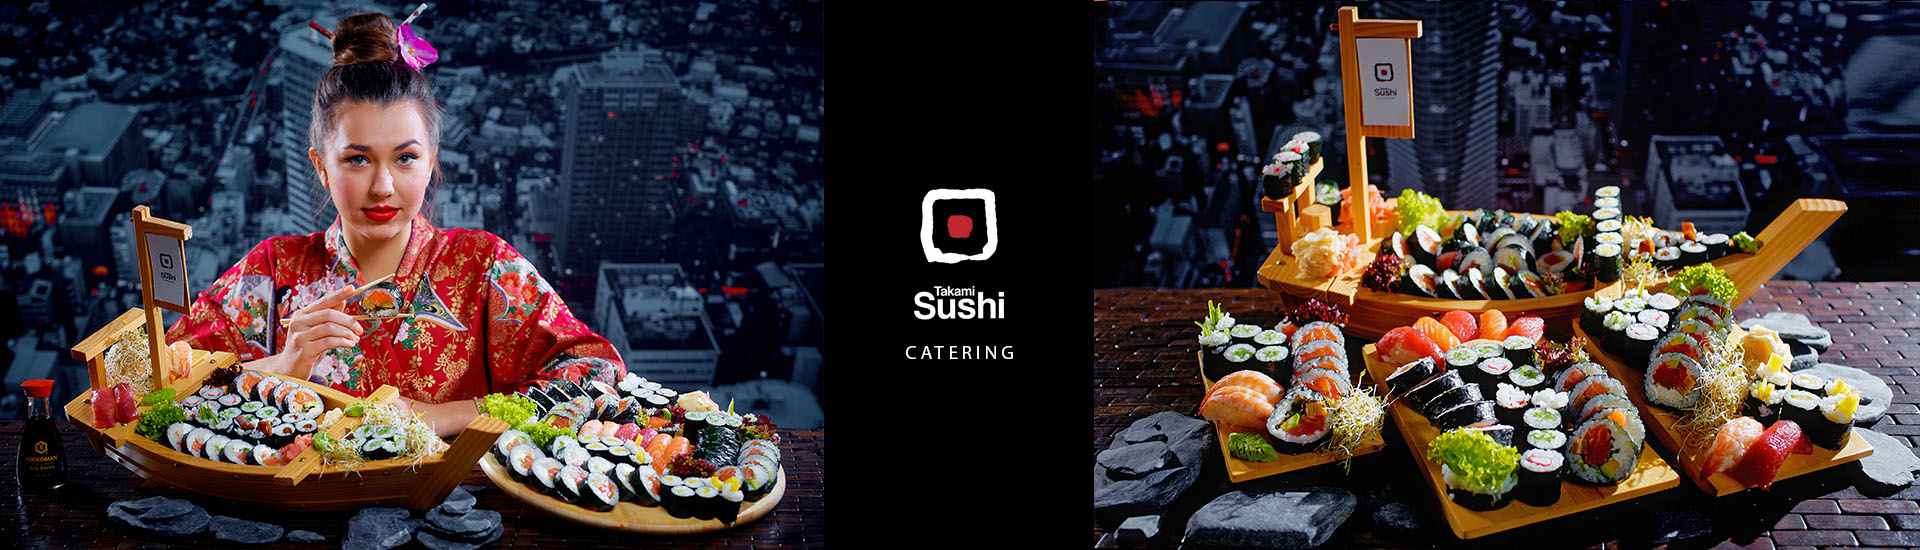 sushi_catering_lublin